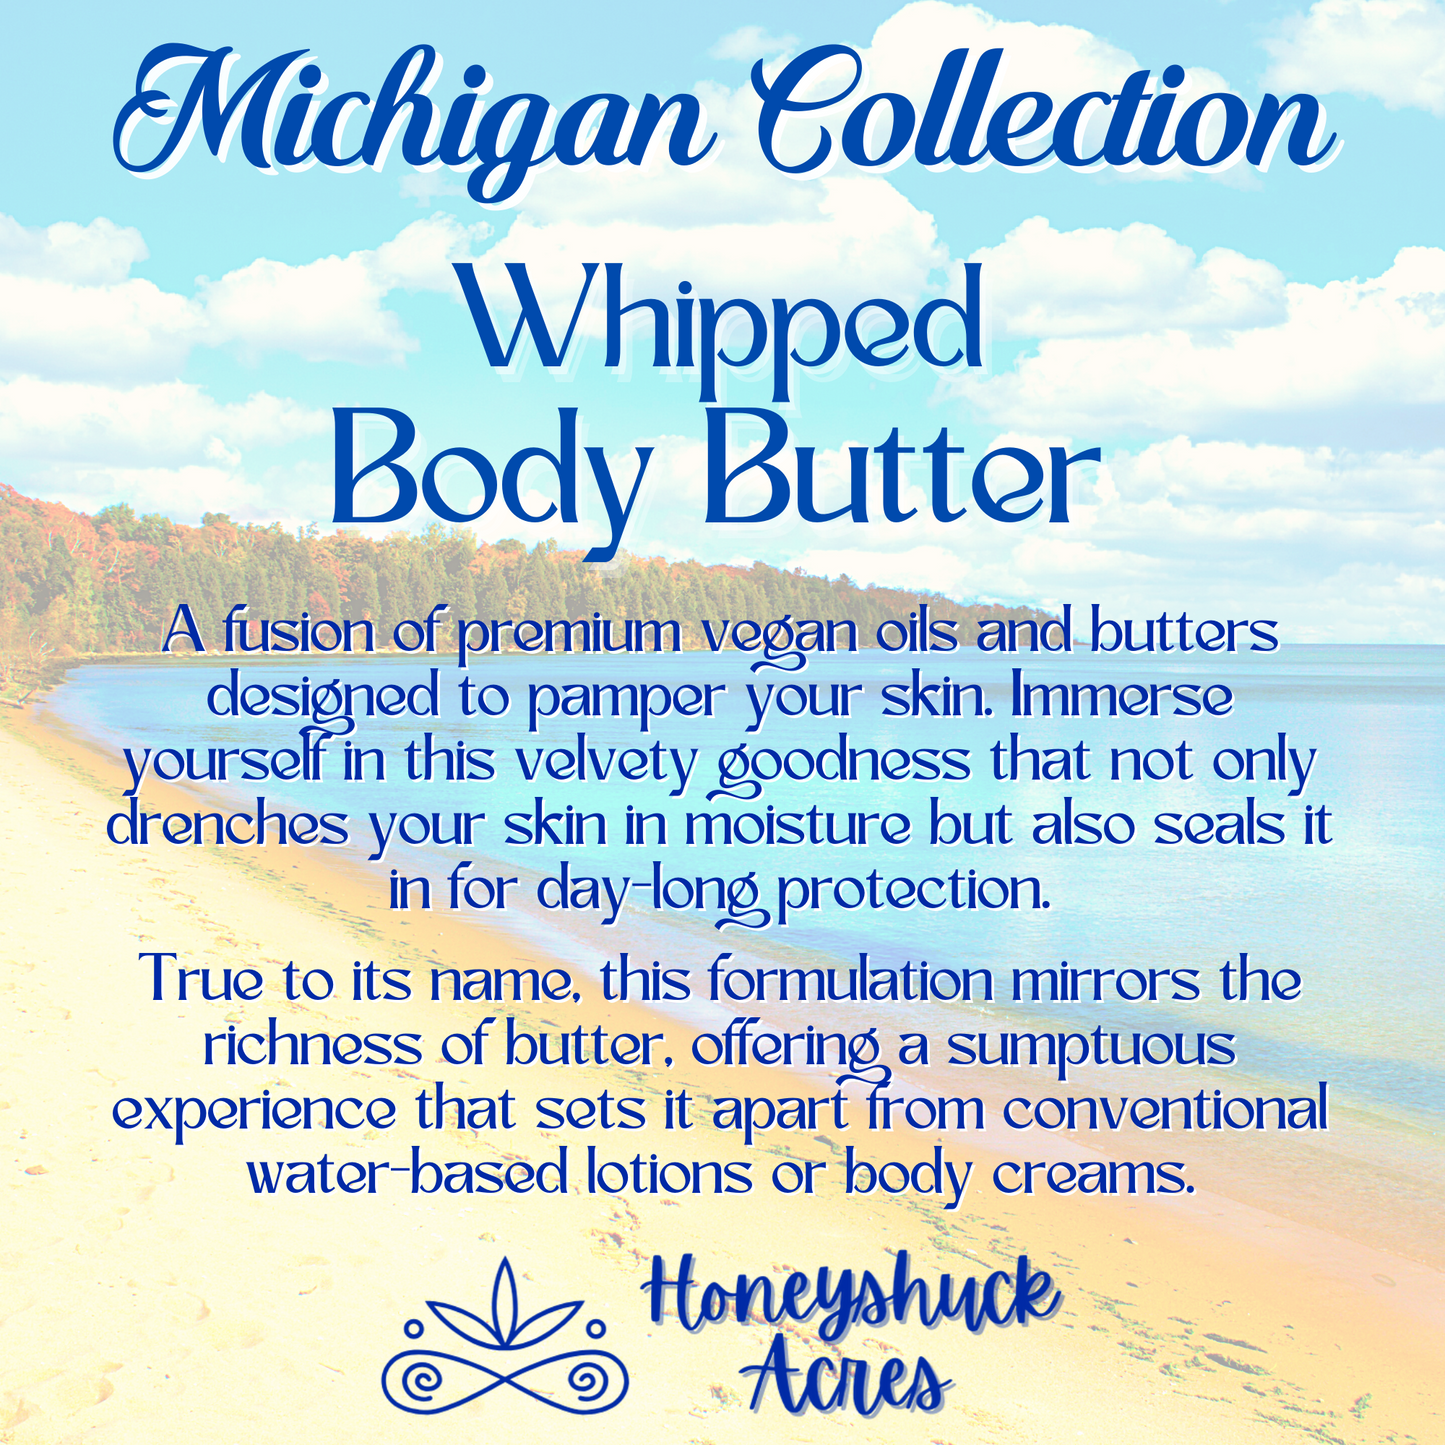 Michigan Whipped Body Butter | Great Lakes Inspired Scent | Choice of Size